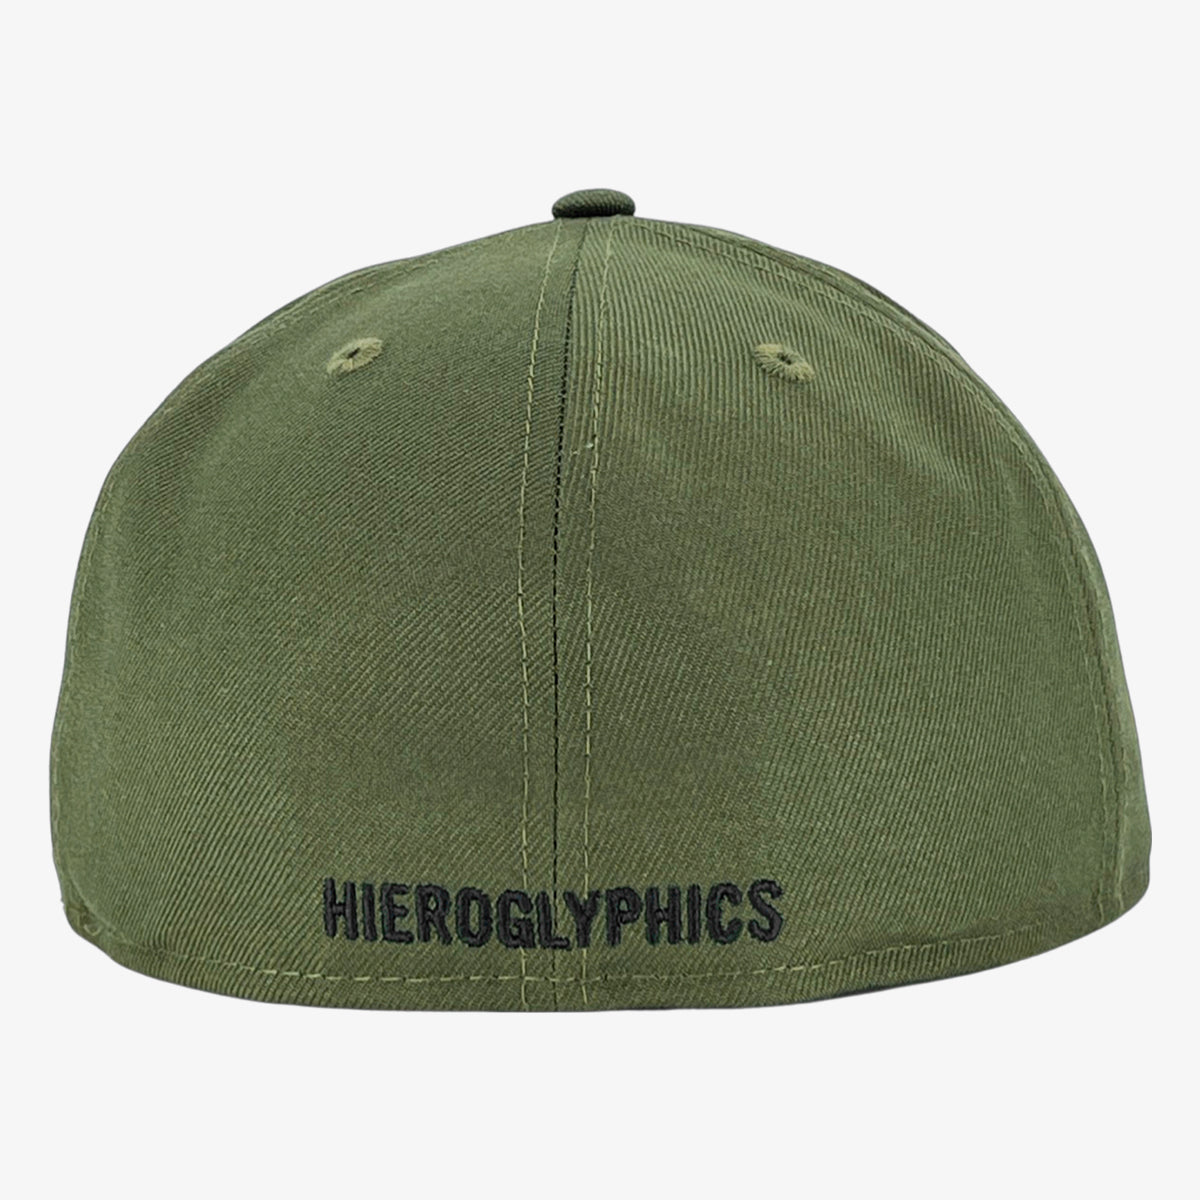 The backside of a rifle green fitted cap with a black embroidered HIEROGLYPHICS wordmark.